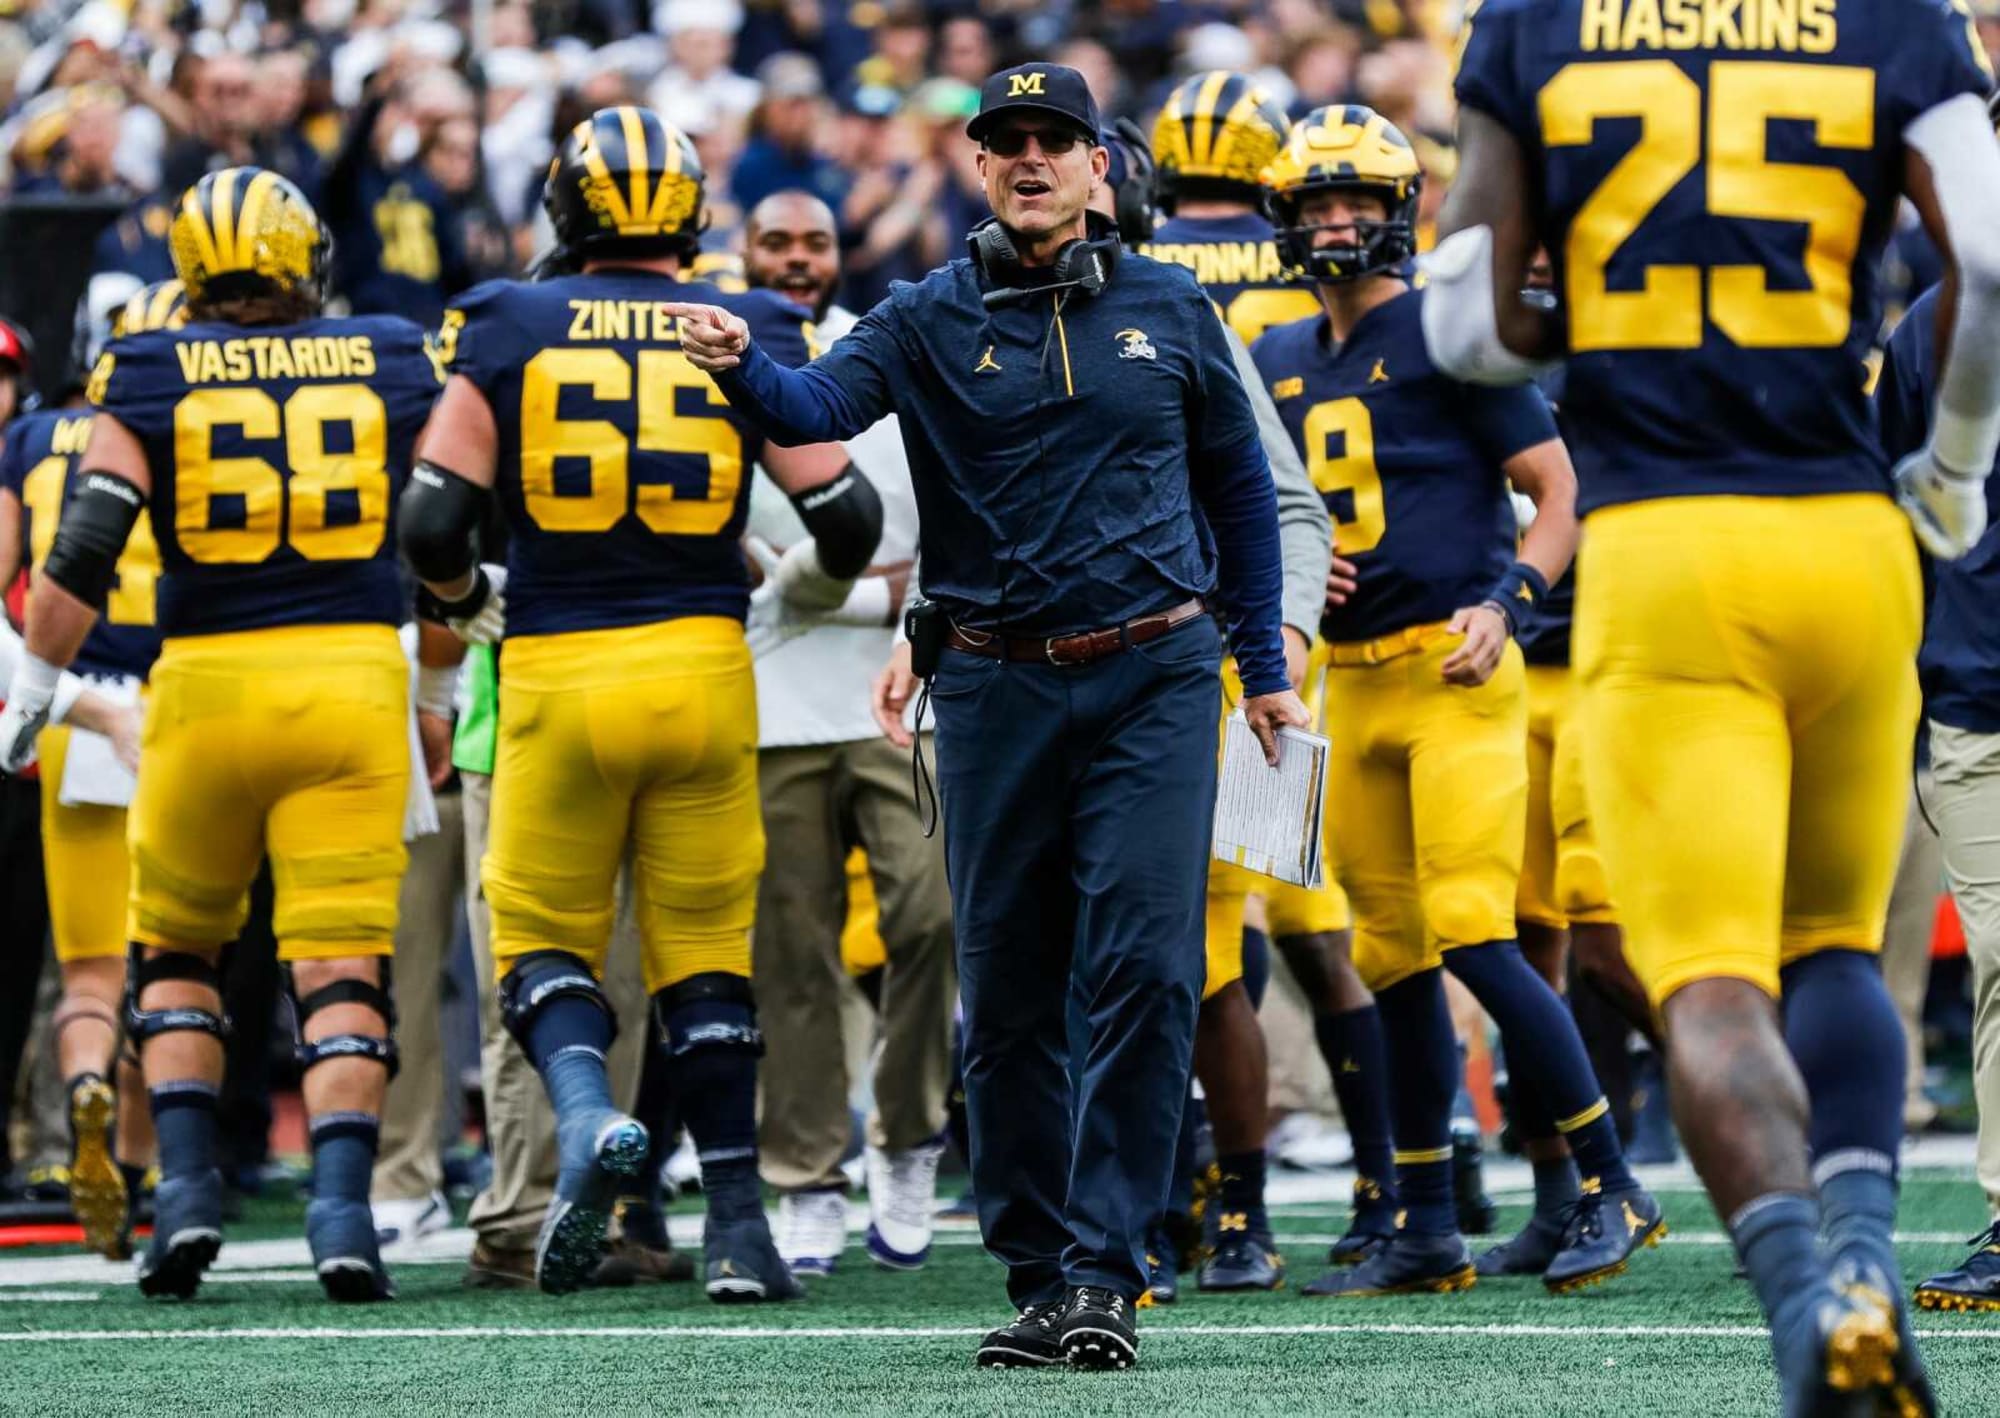 Michigan Football vs Indiana, Odds and Prediction for Week 10